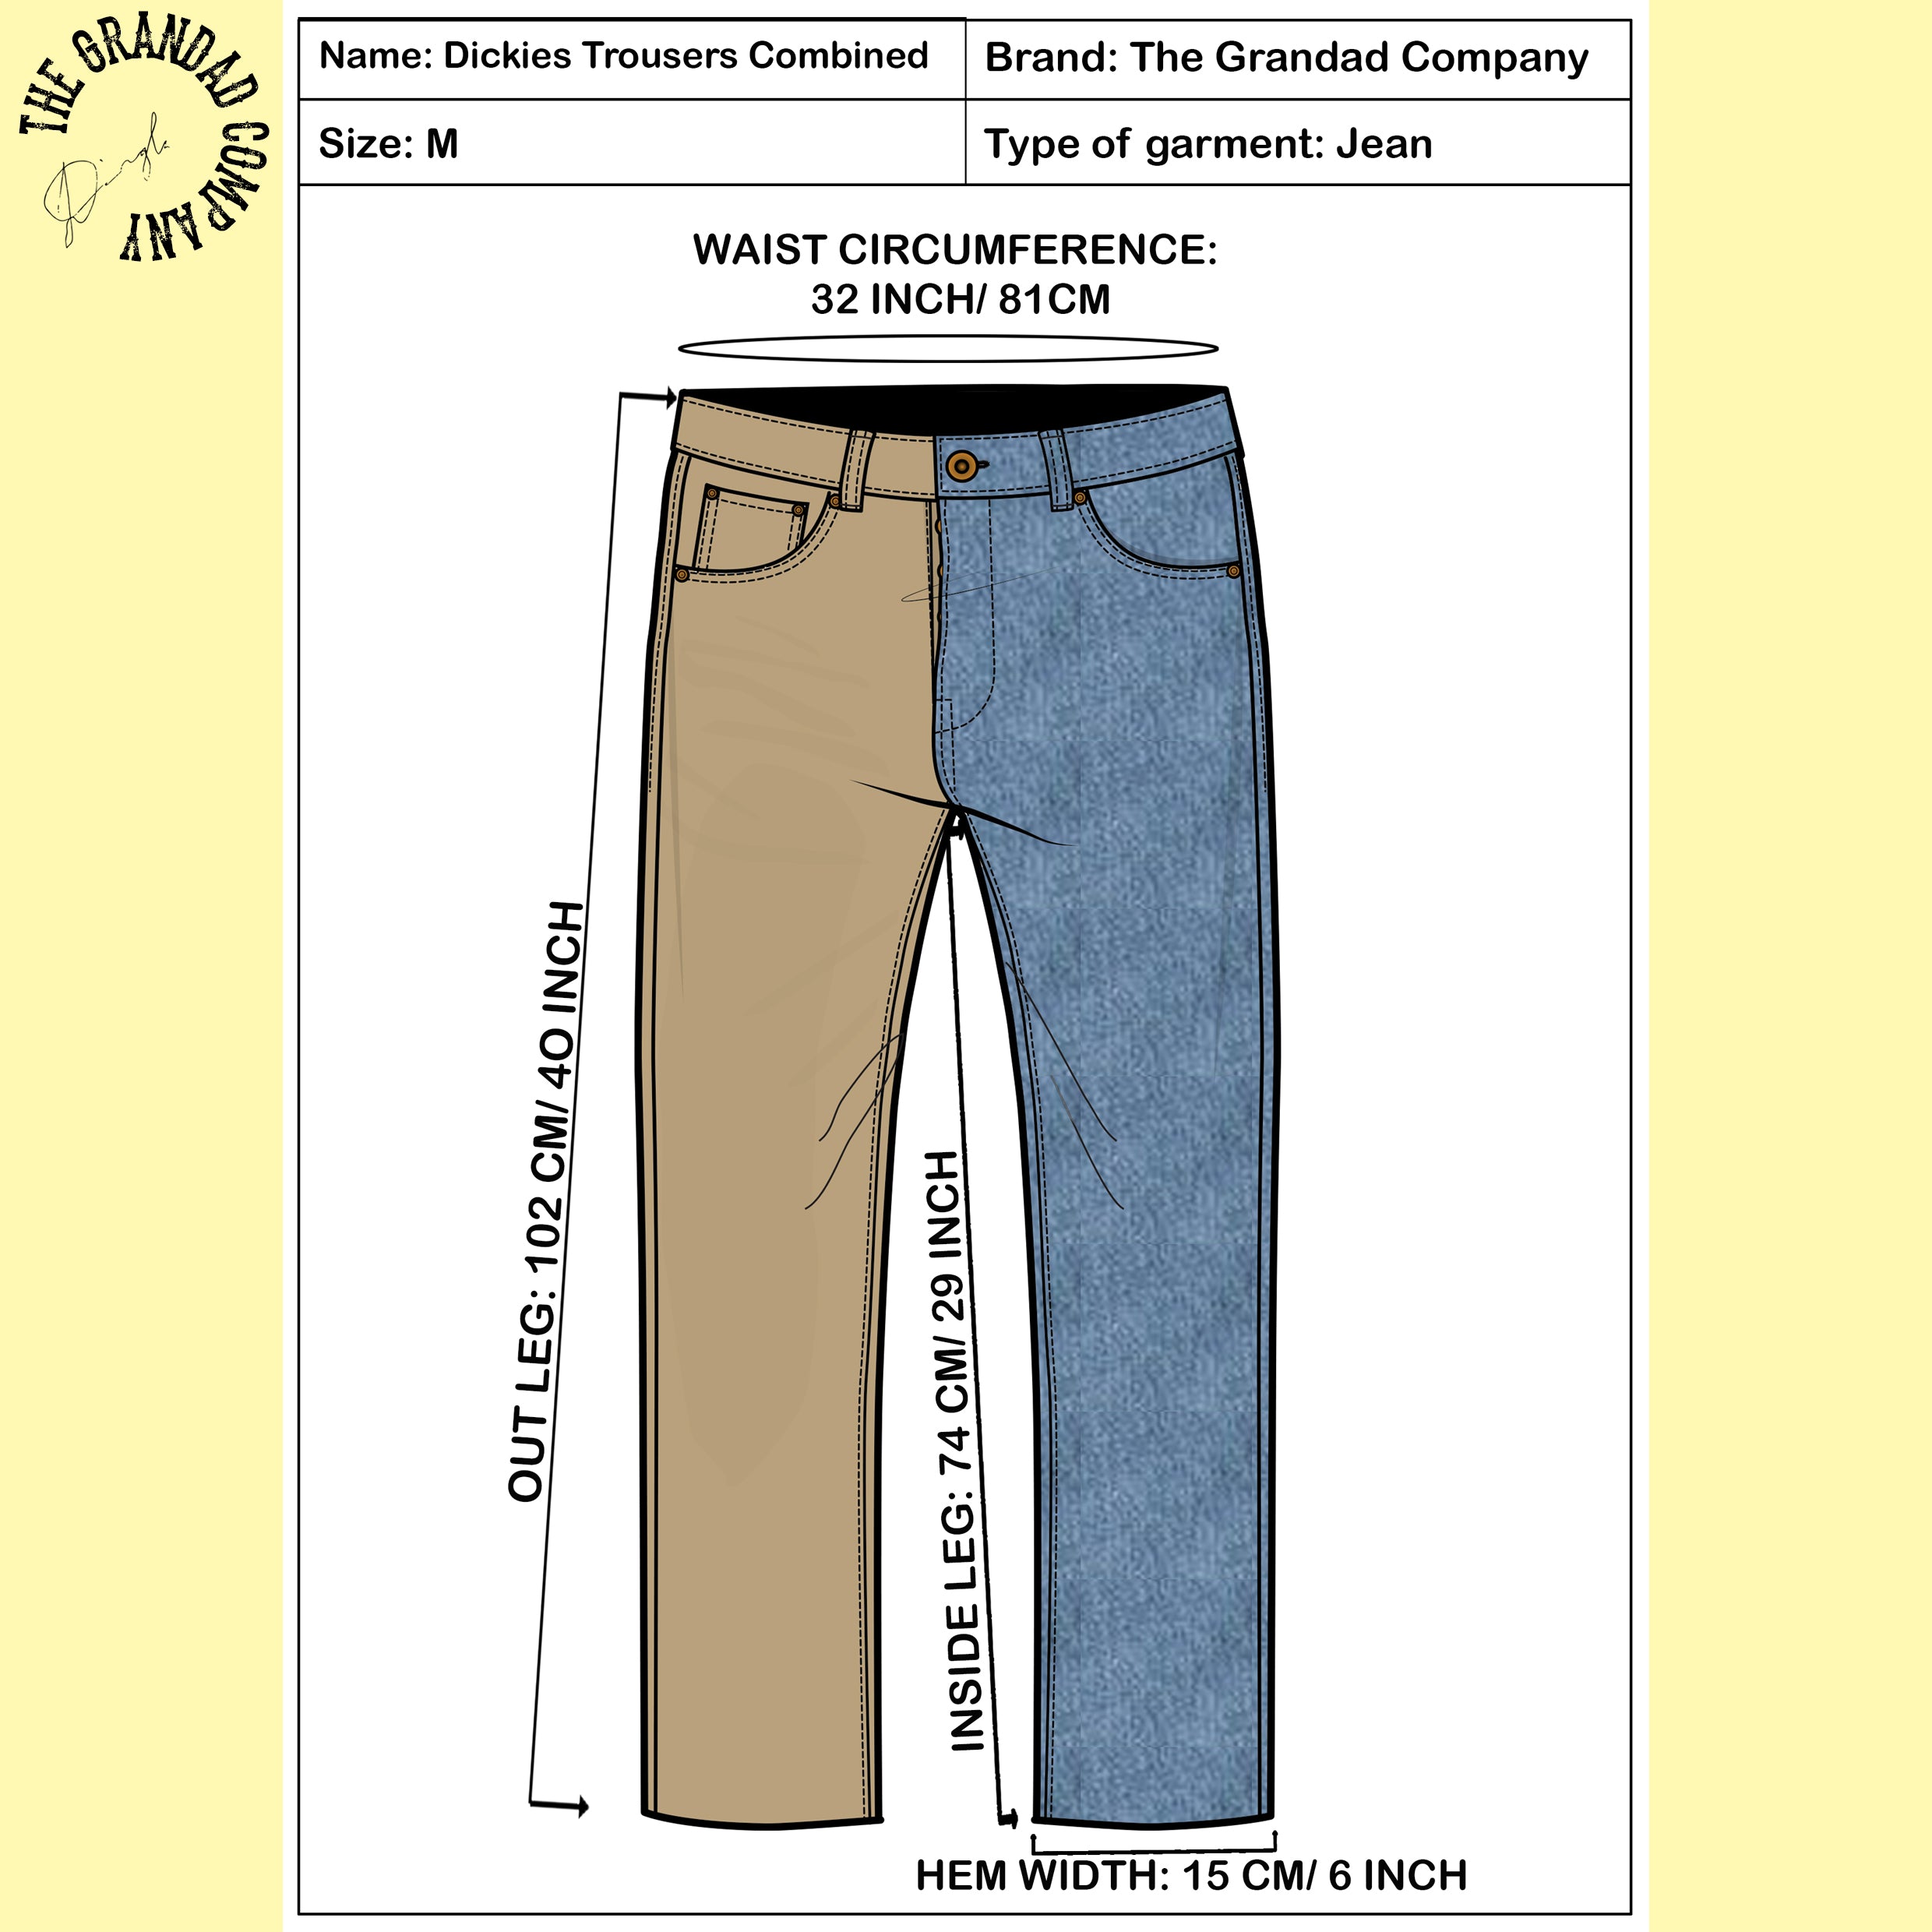 Dickies Trousers Combined